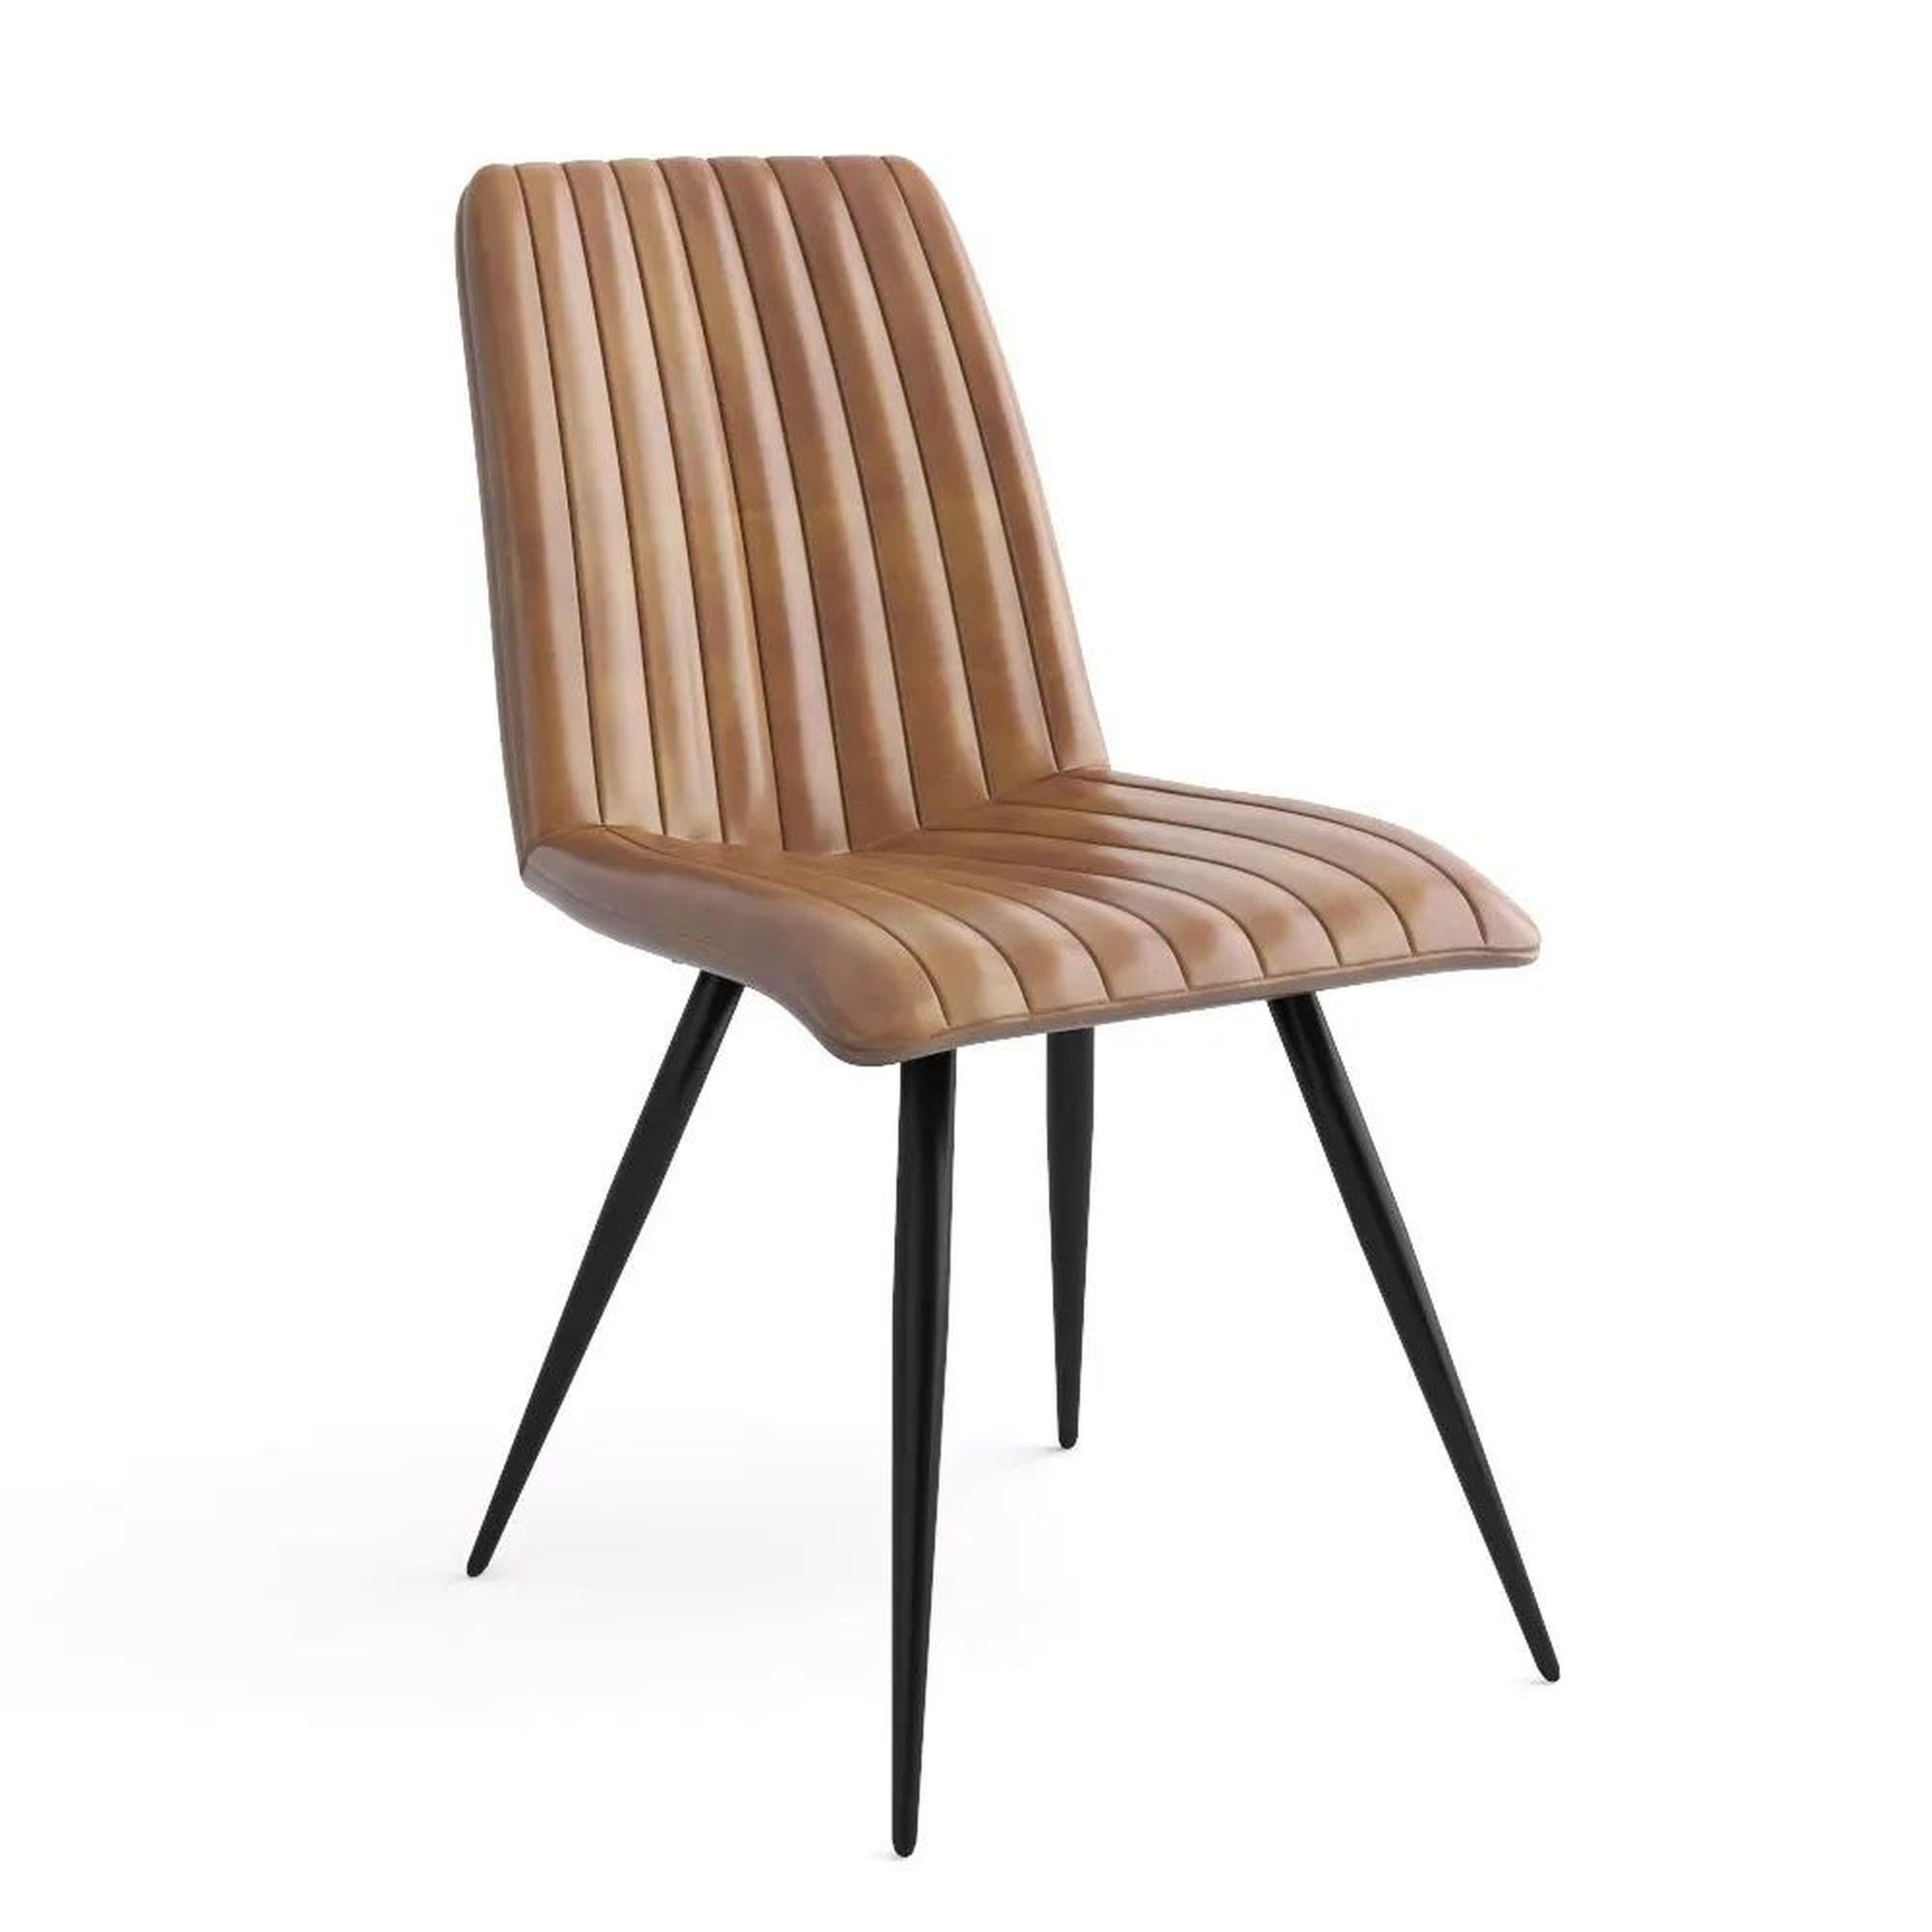 Margo Brown Dining Chair, Genuine Leather with Metal Legs (Sold in Pairs)